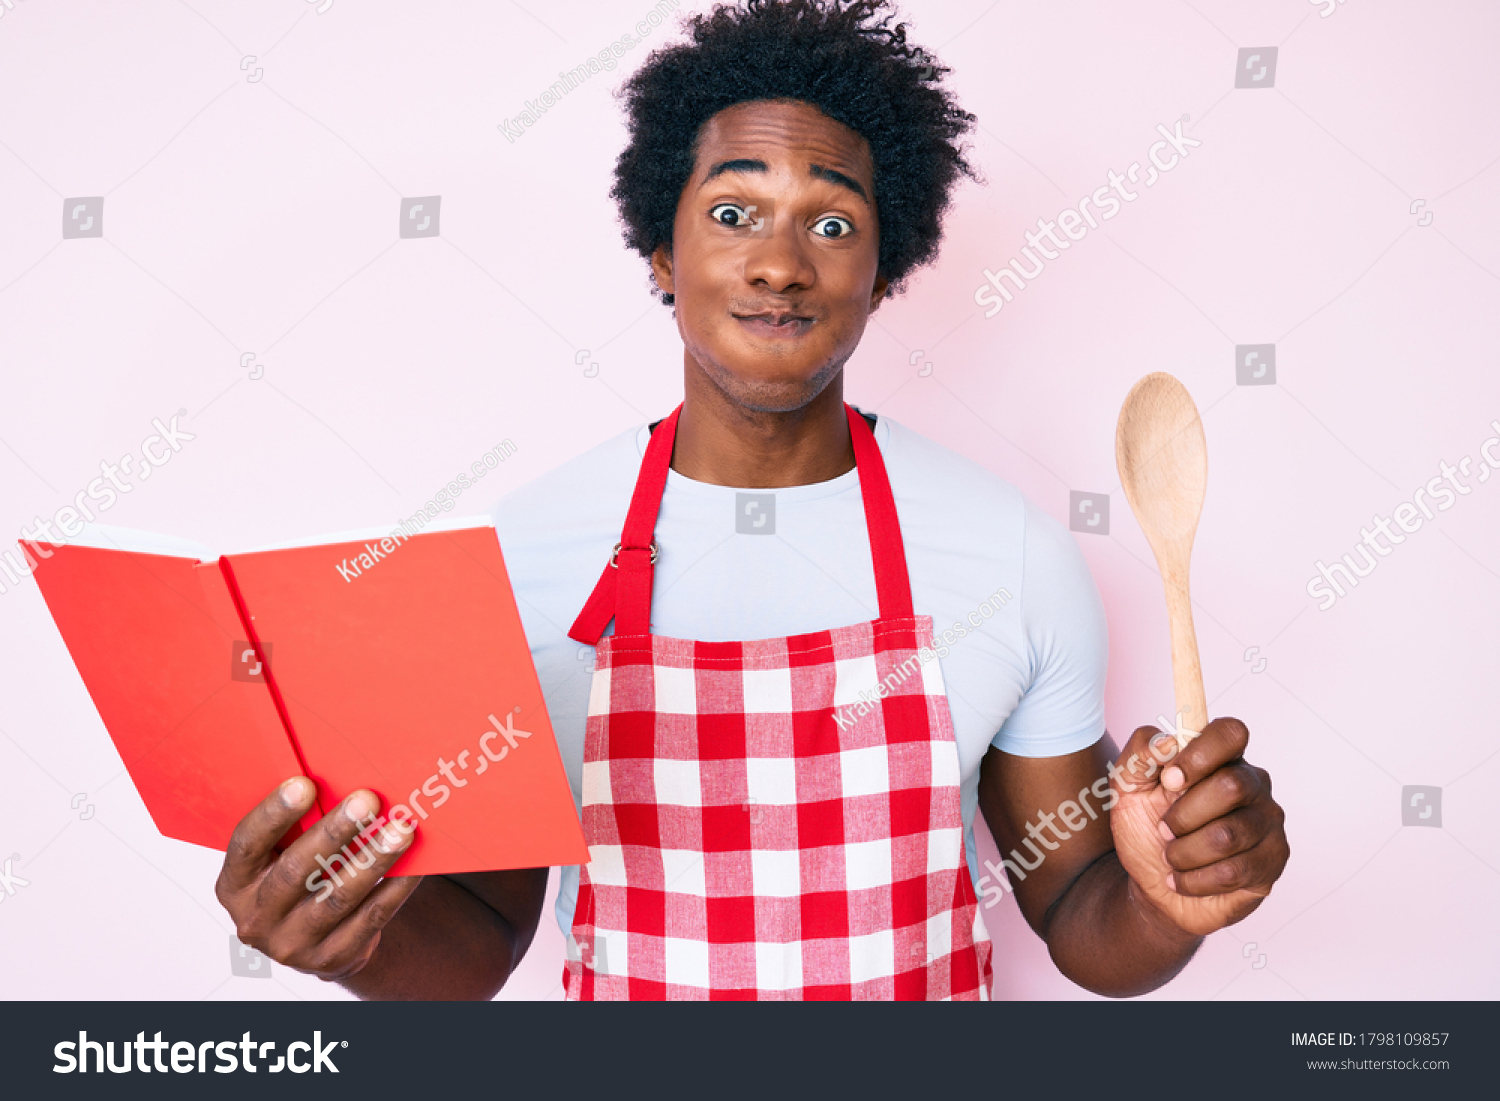 stock-photo-handsome-african-american-man-with-afro-hair-wearing-professional-baker-apron-reading-cooking-1798109857.jpg